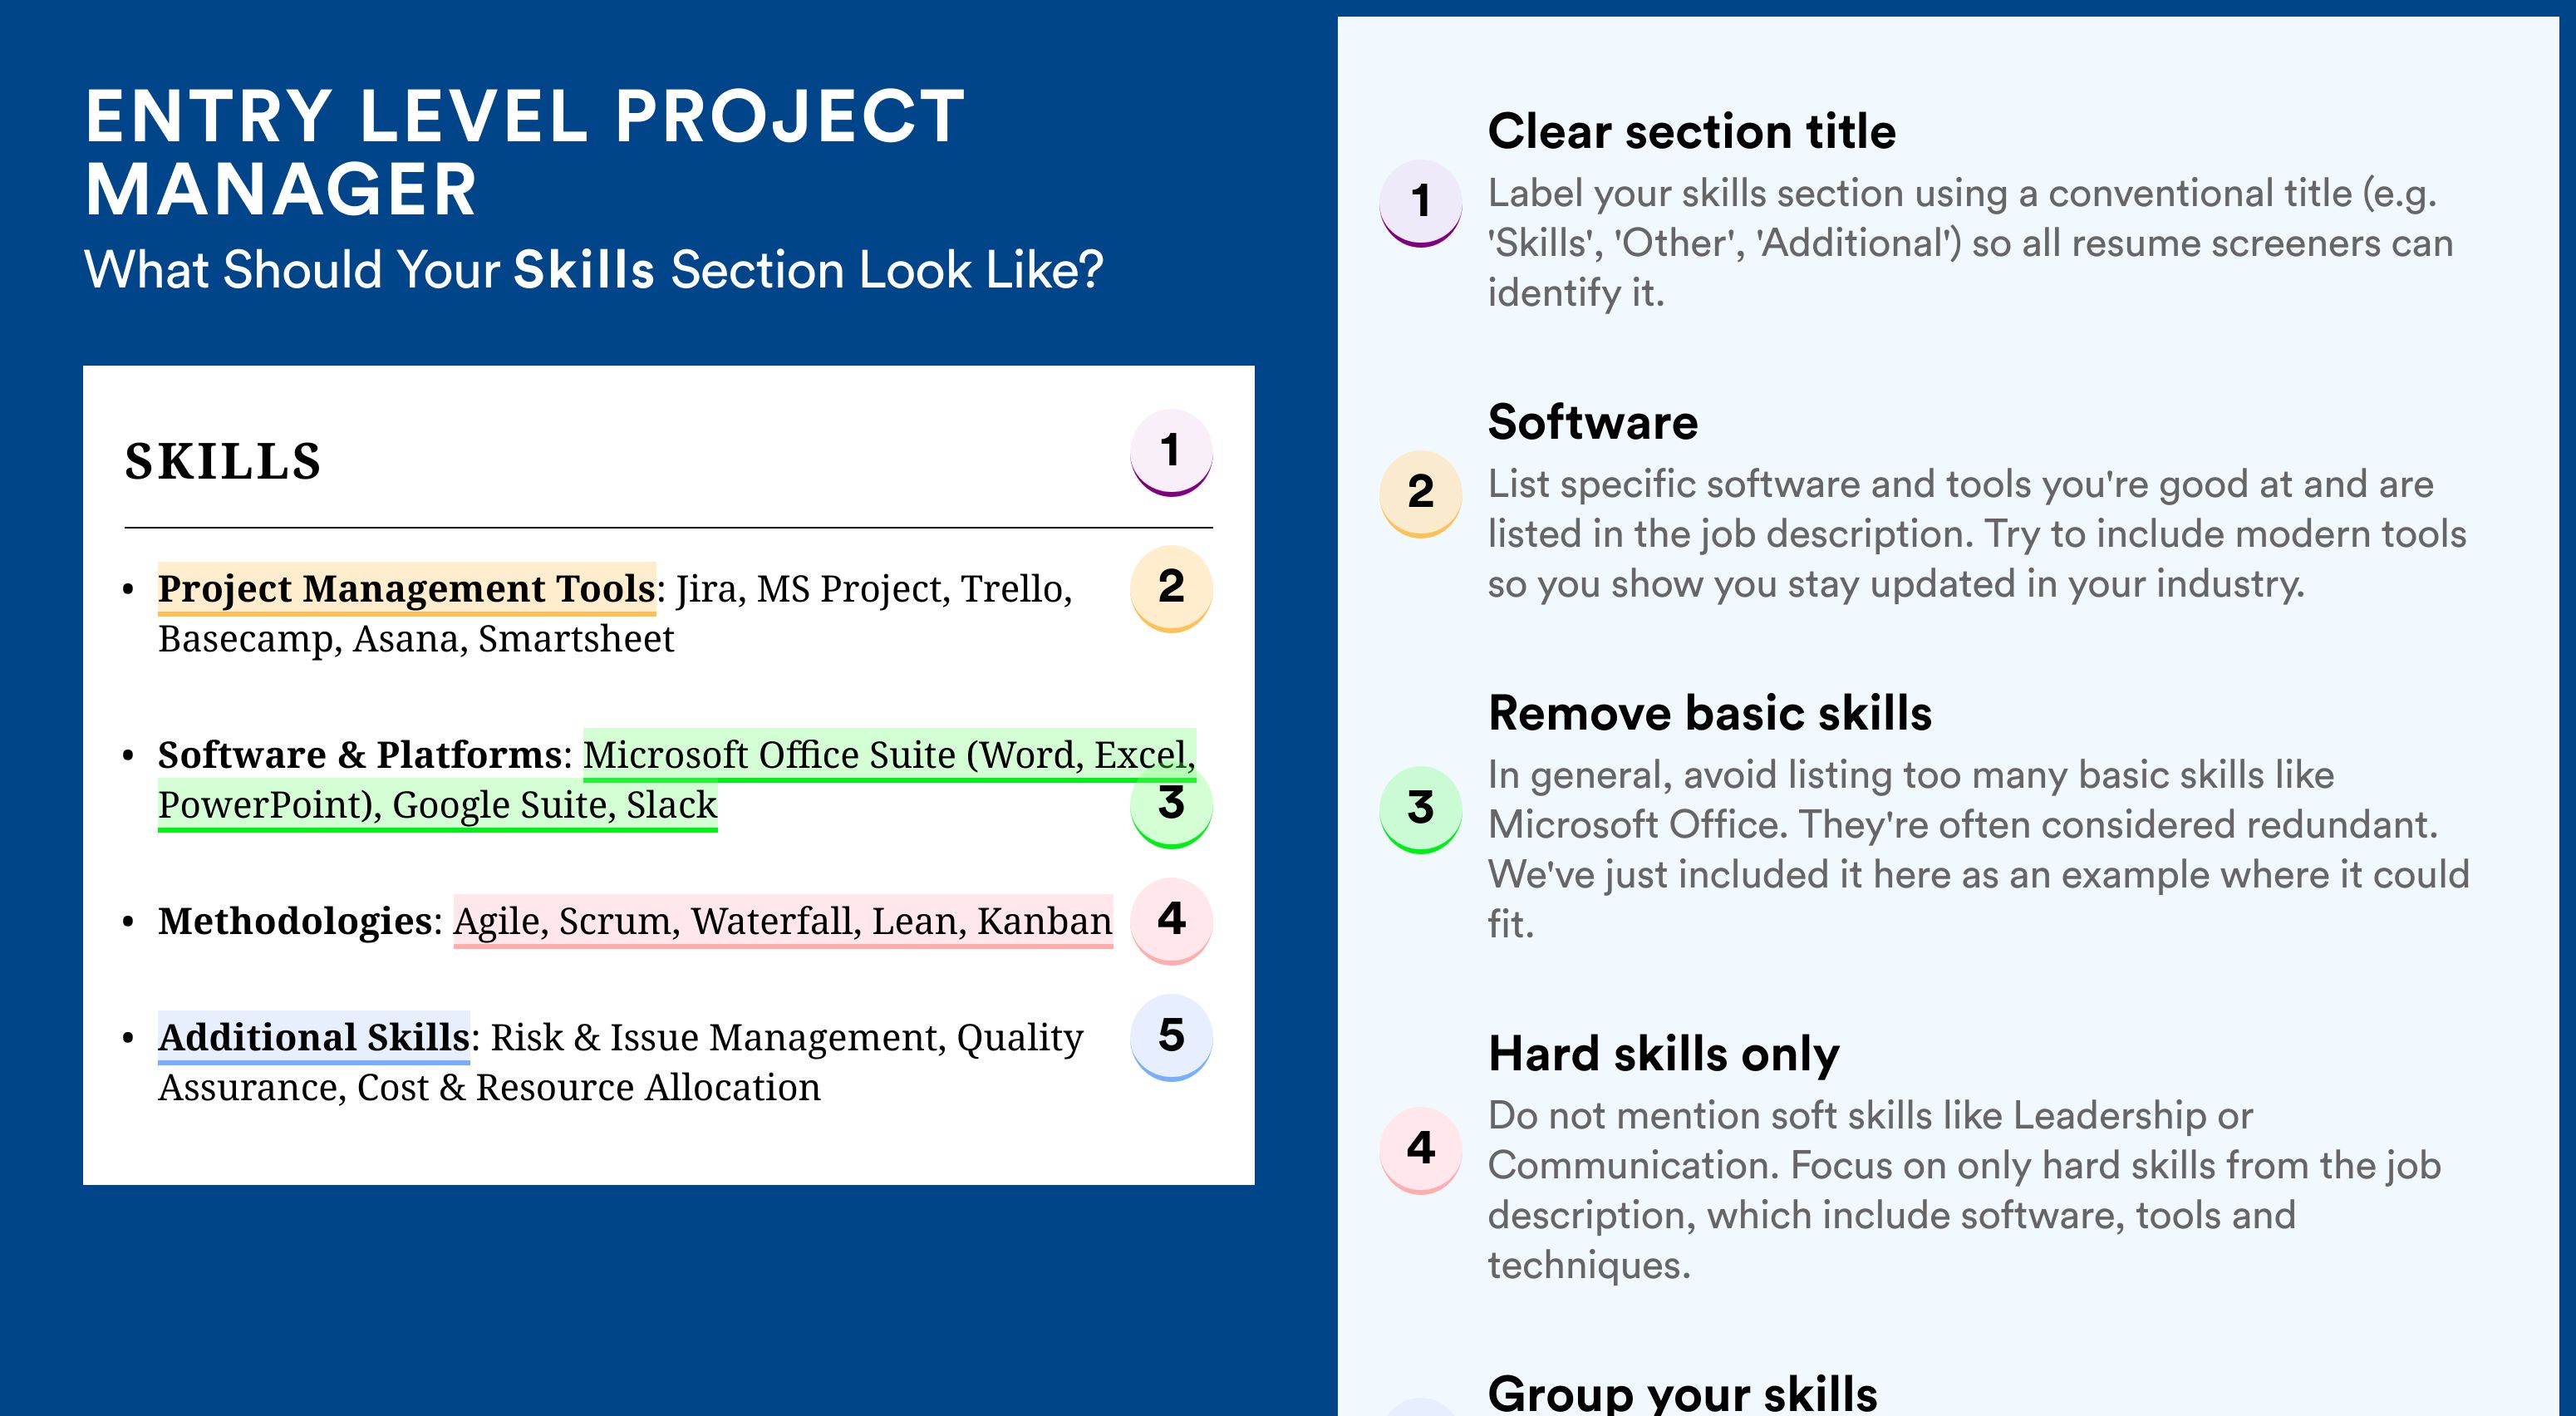 How To Write Your Skills Section - Entry Level Project Manager Roles